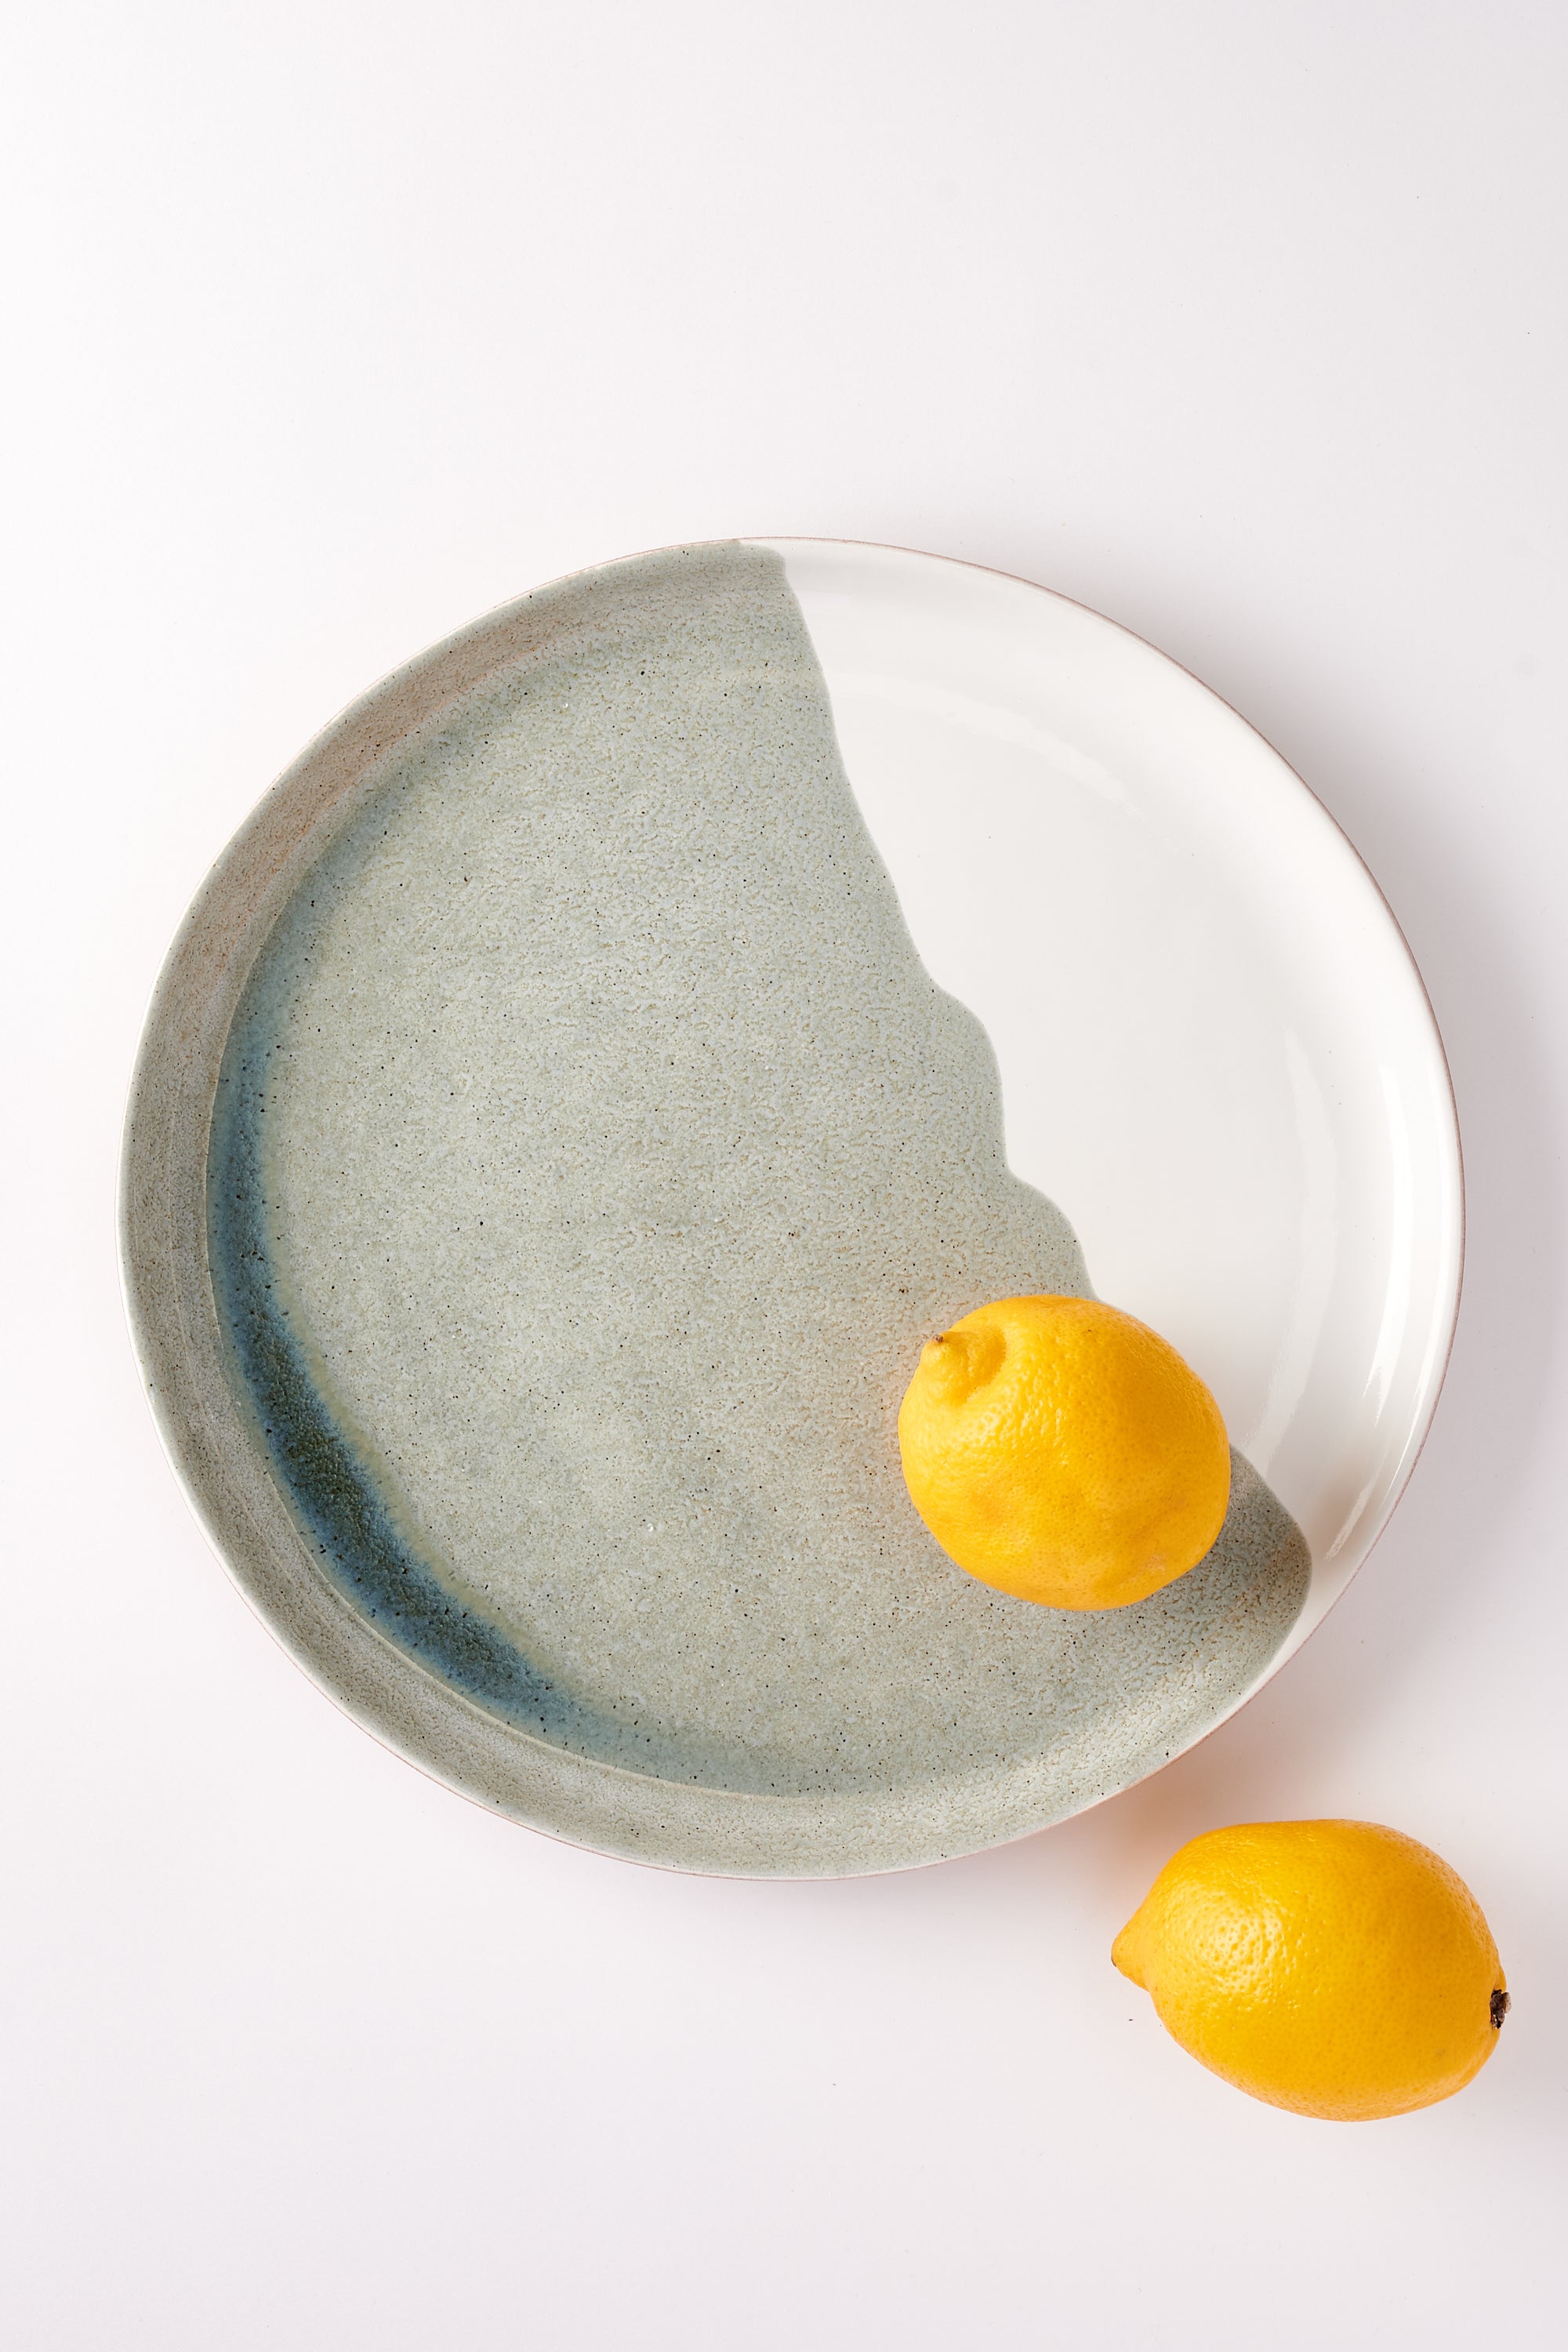 Oriana’s Ashes Dinner Plate with Moss Overglaze